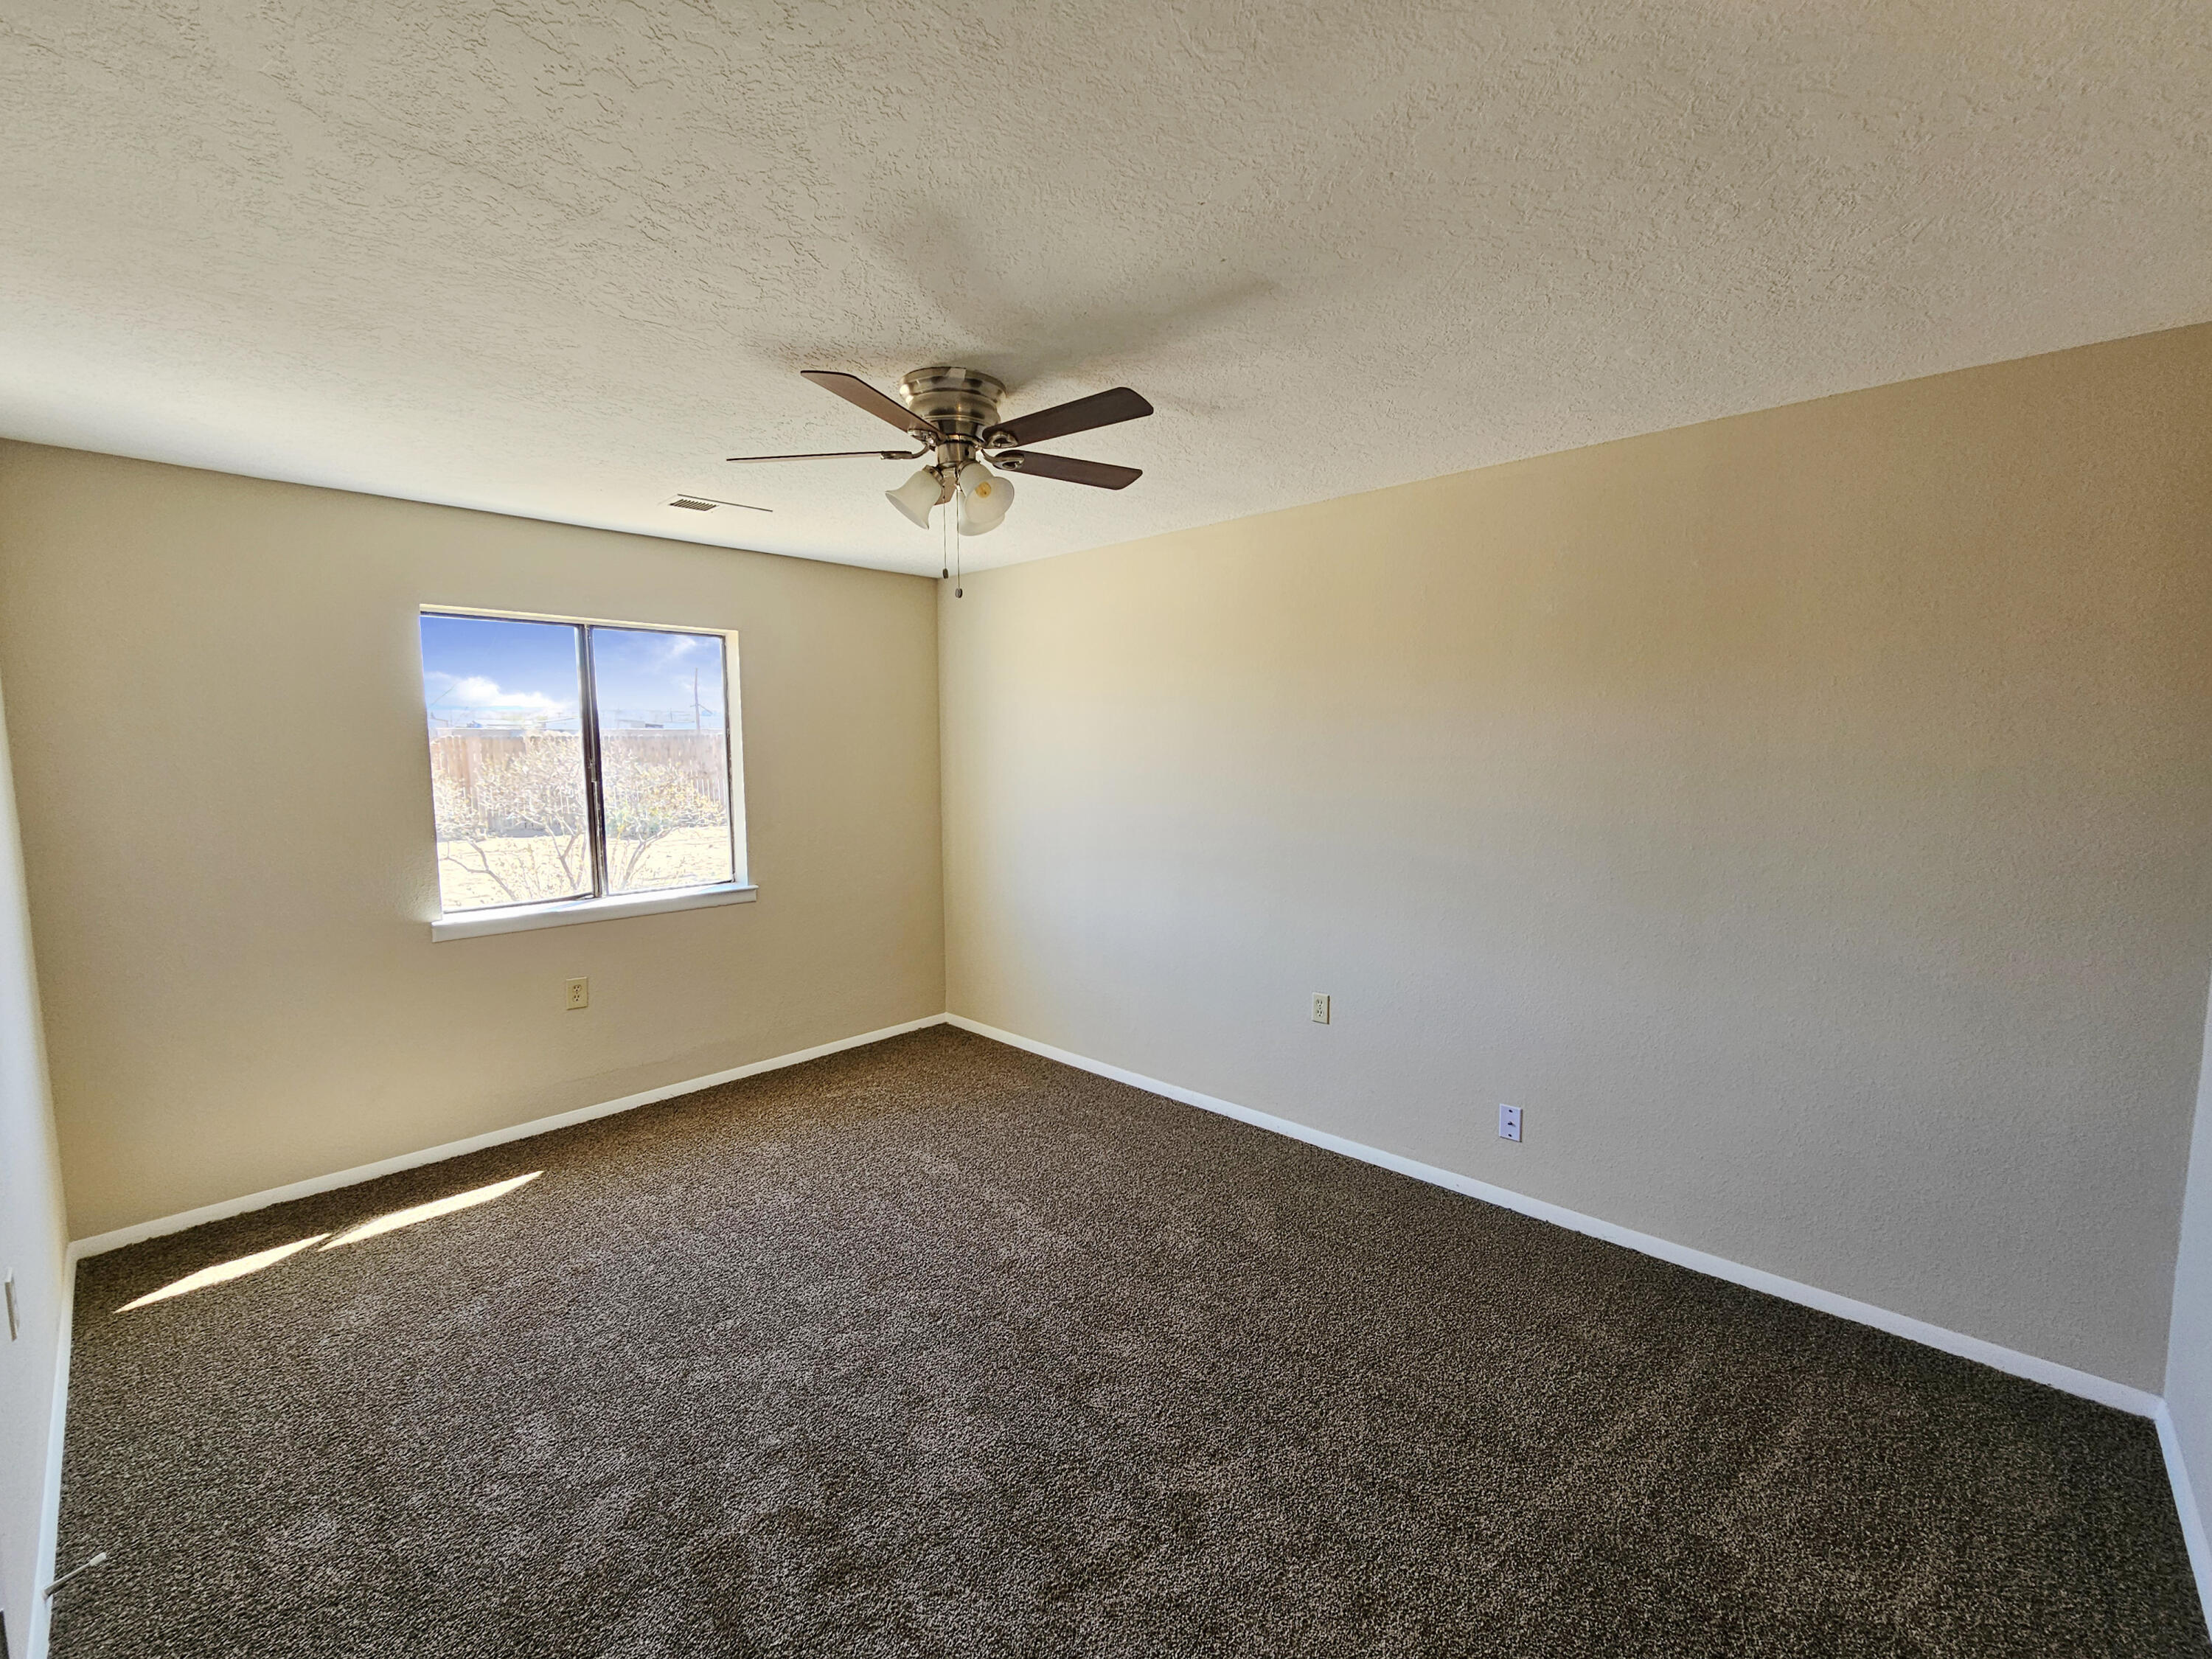 4801 2nd Street SW, Albuquerque, New Mexico 87105, 4 Bedrooms Bedrooms, ,2 BathroomsBathrooms,Residential,For Sale,4801 2nd Street SW,1062021